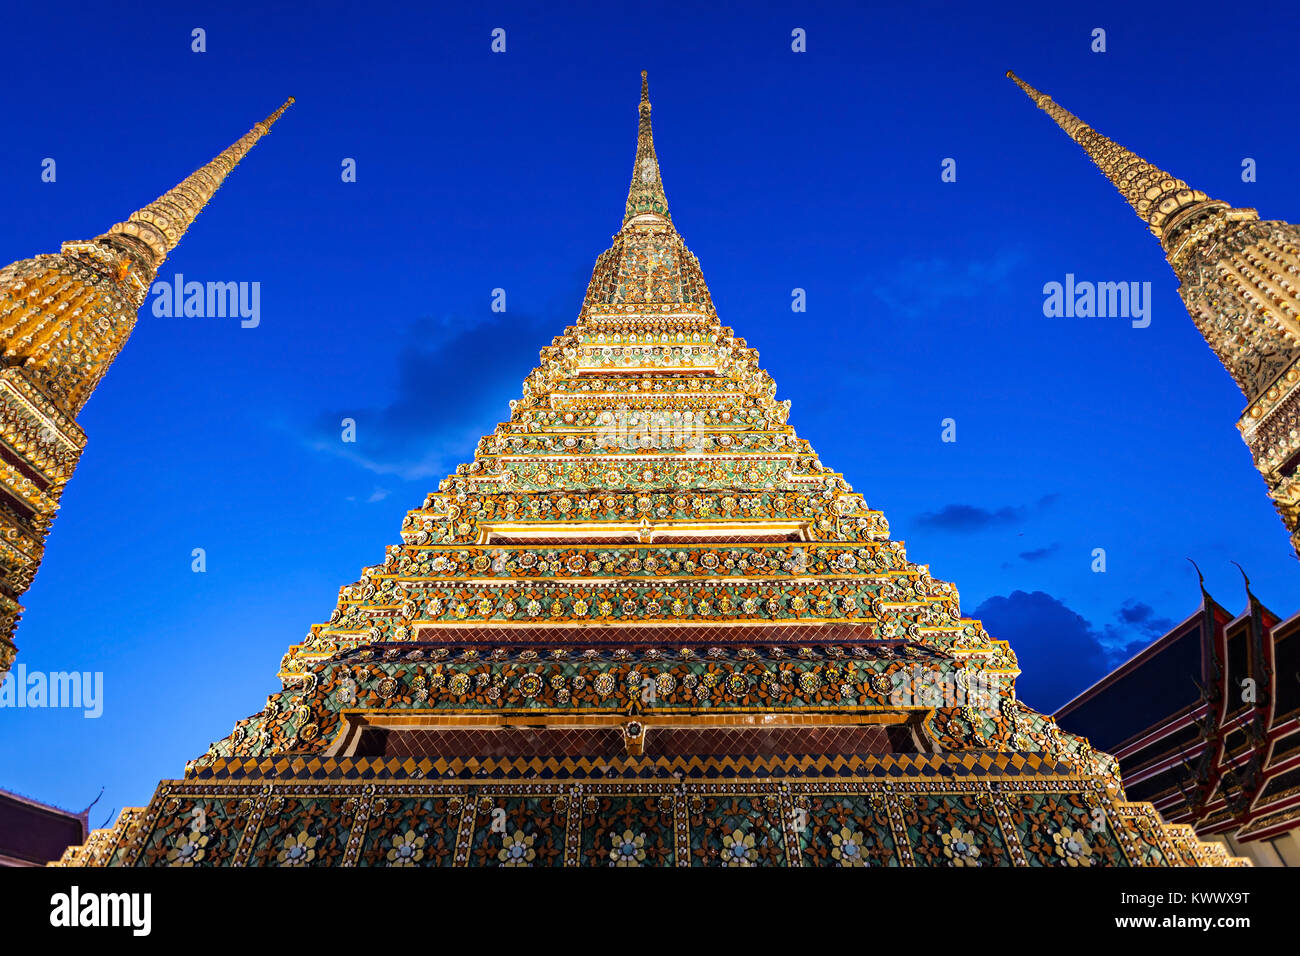 Wat Pho is a Buddhist temple complex in Phra Nakhon district in Bangkok, Thailand Stock Photo